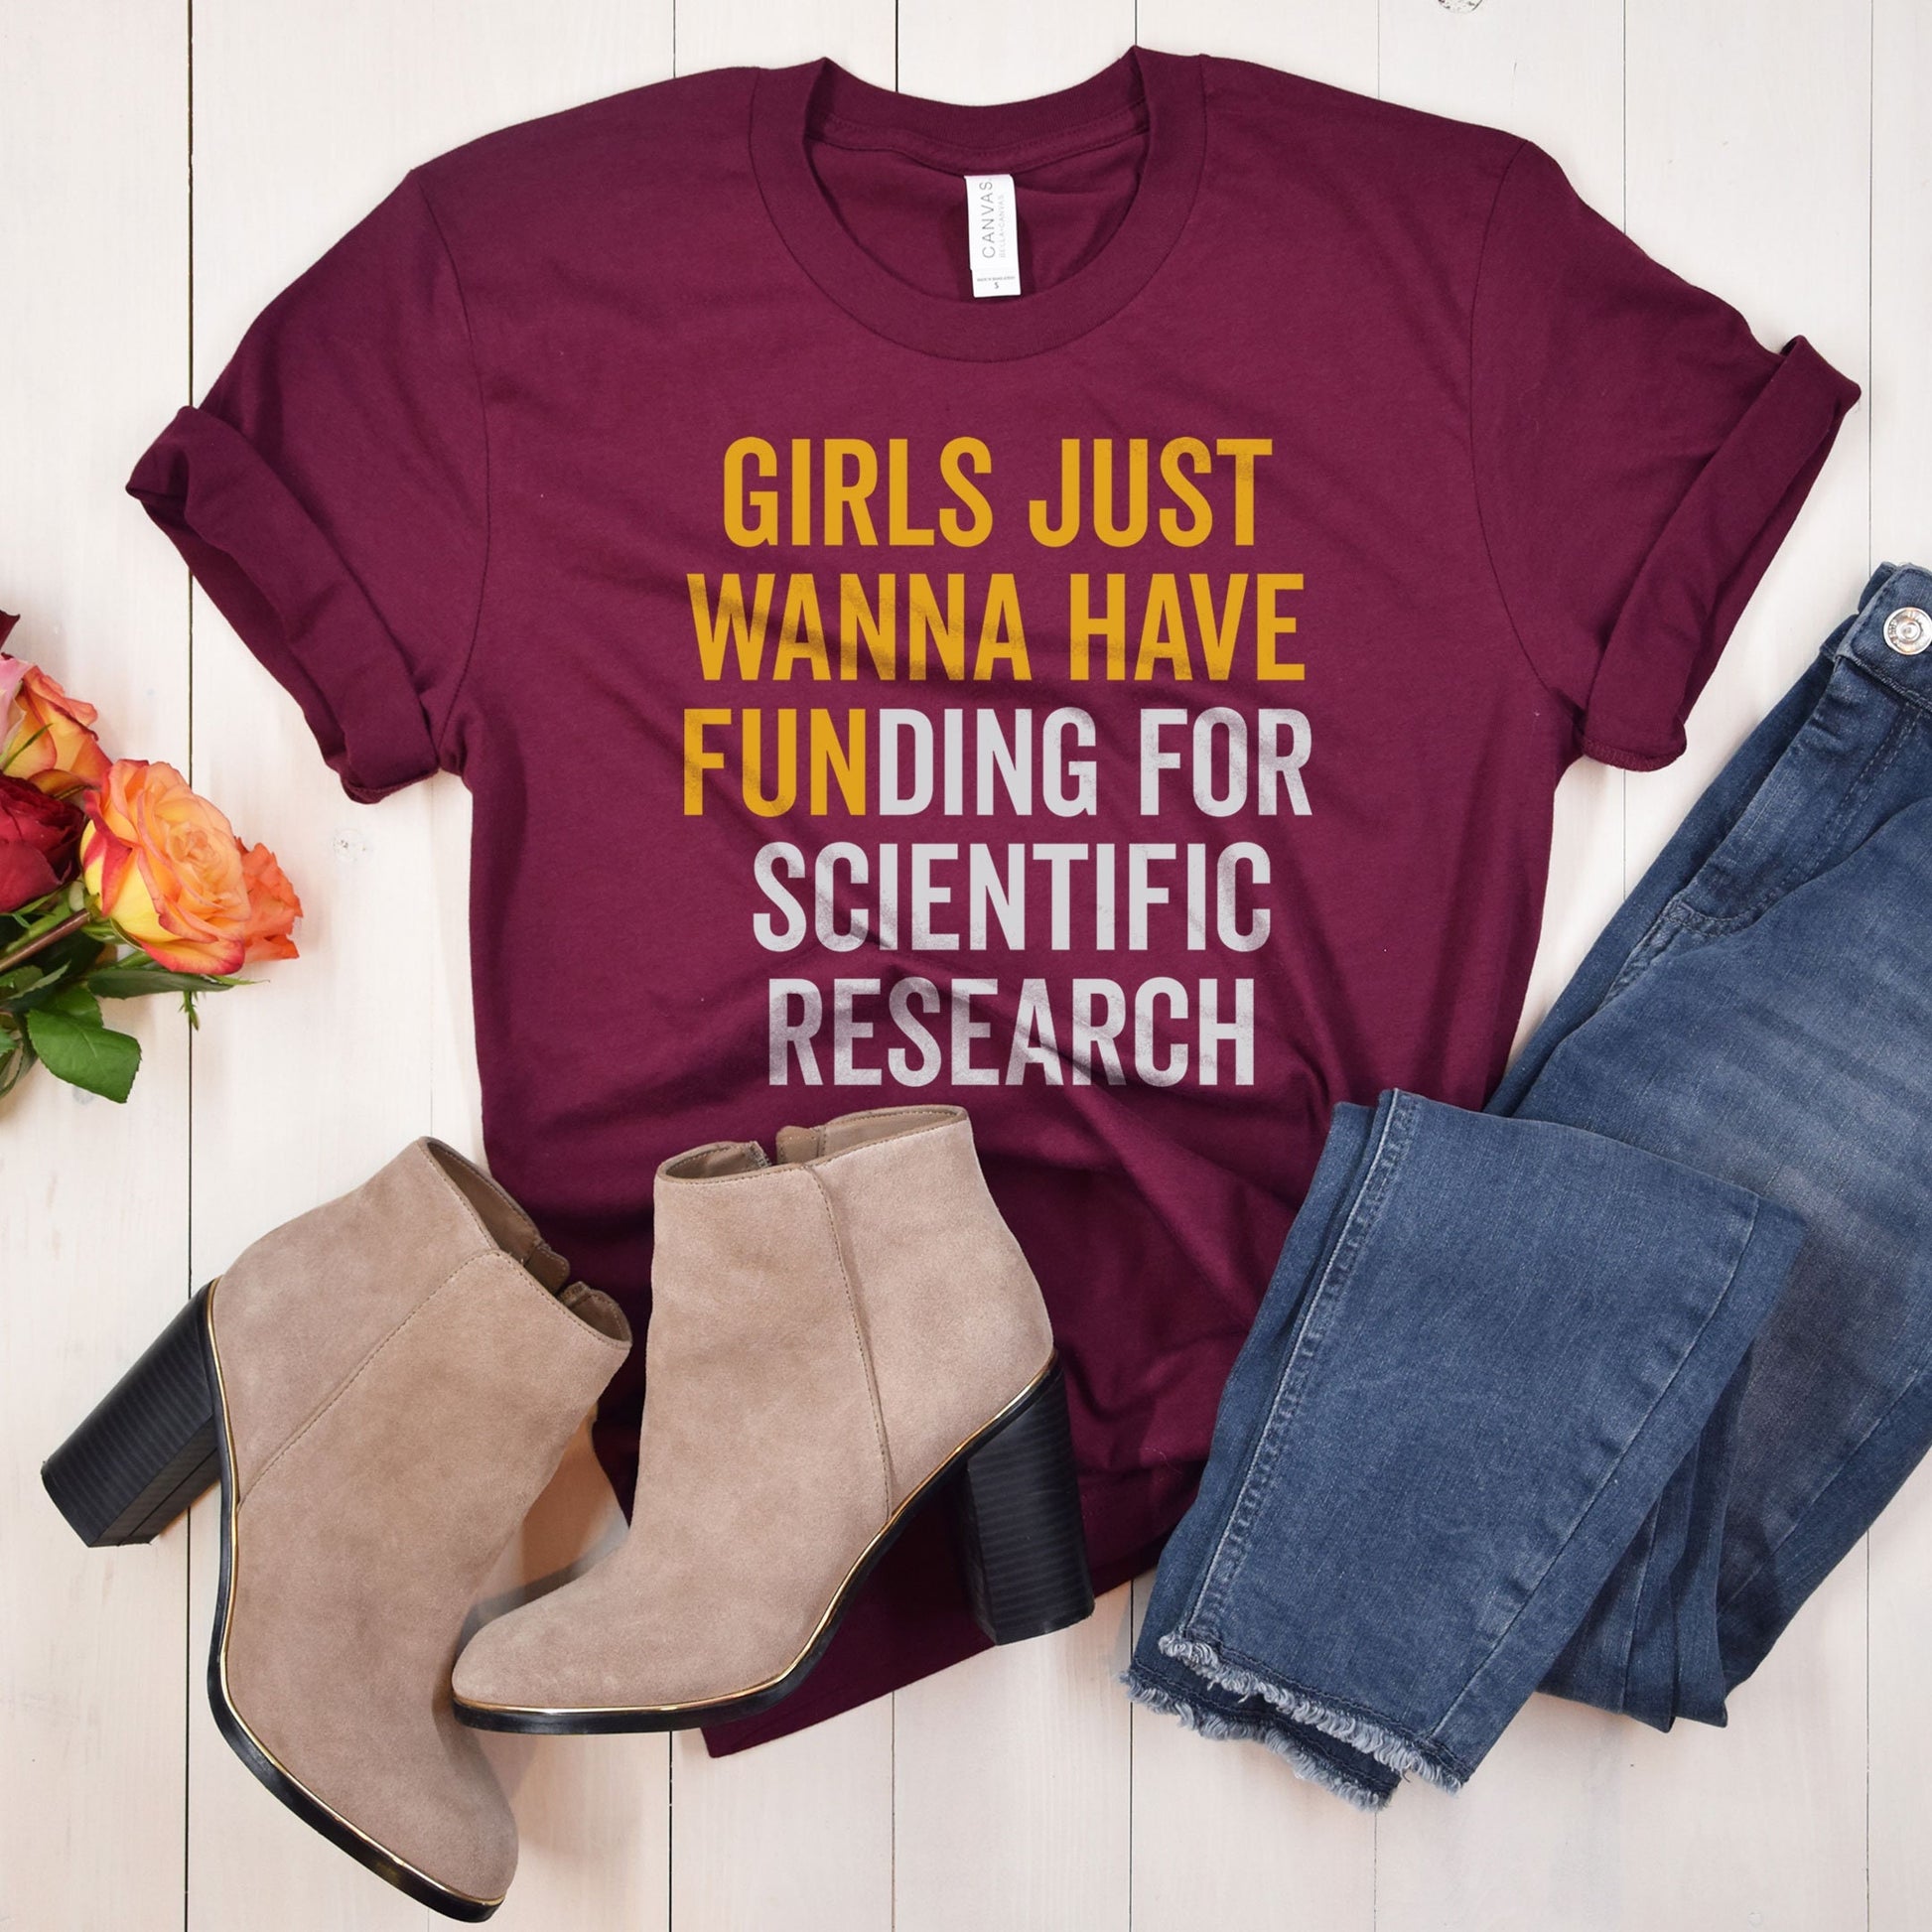 Girls Just Wanna Have Funding For Scientific Research, Girl Scientist Tee, Grad PhD Scientist Shirt, March for Scientific Research Gifts Dr